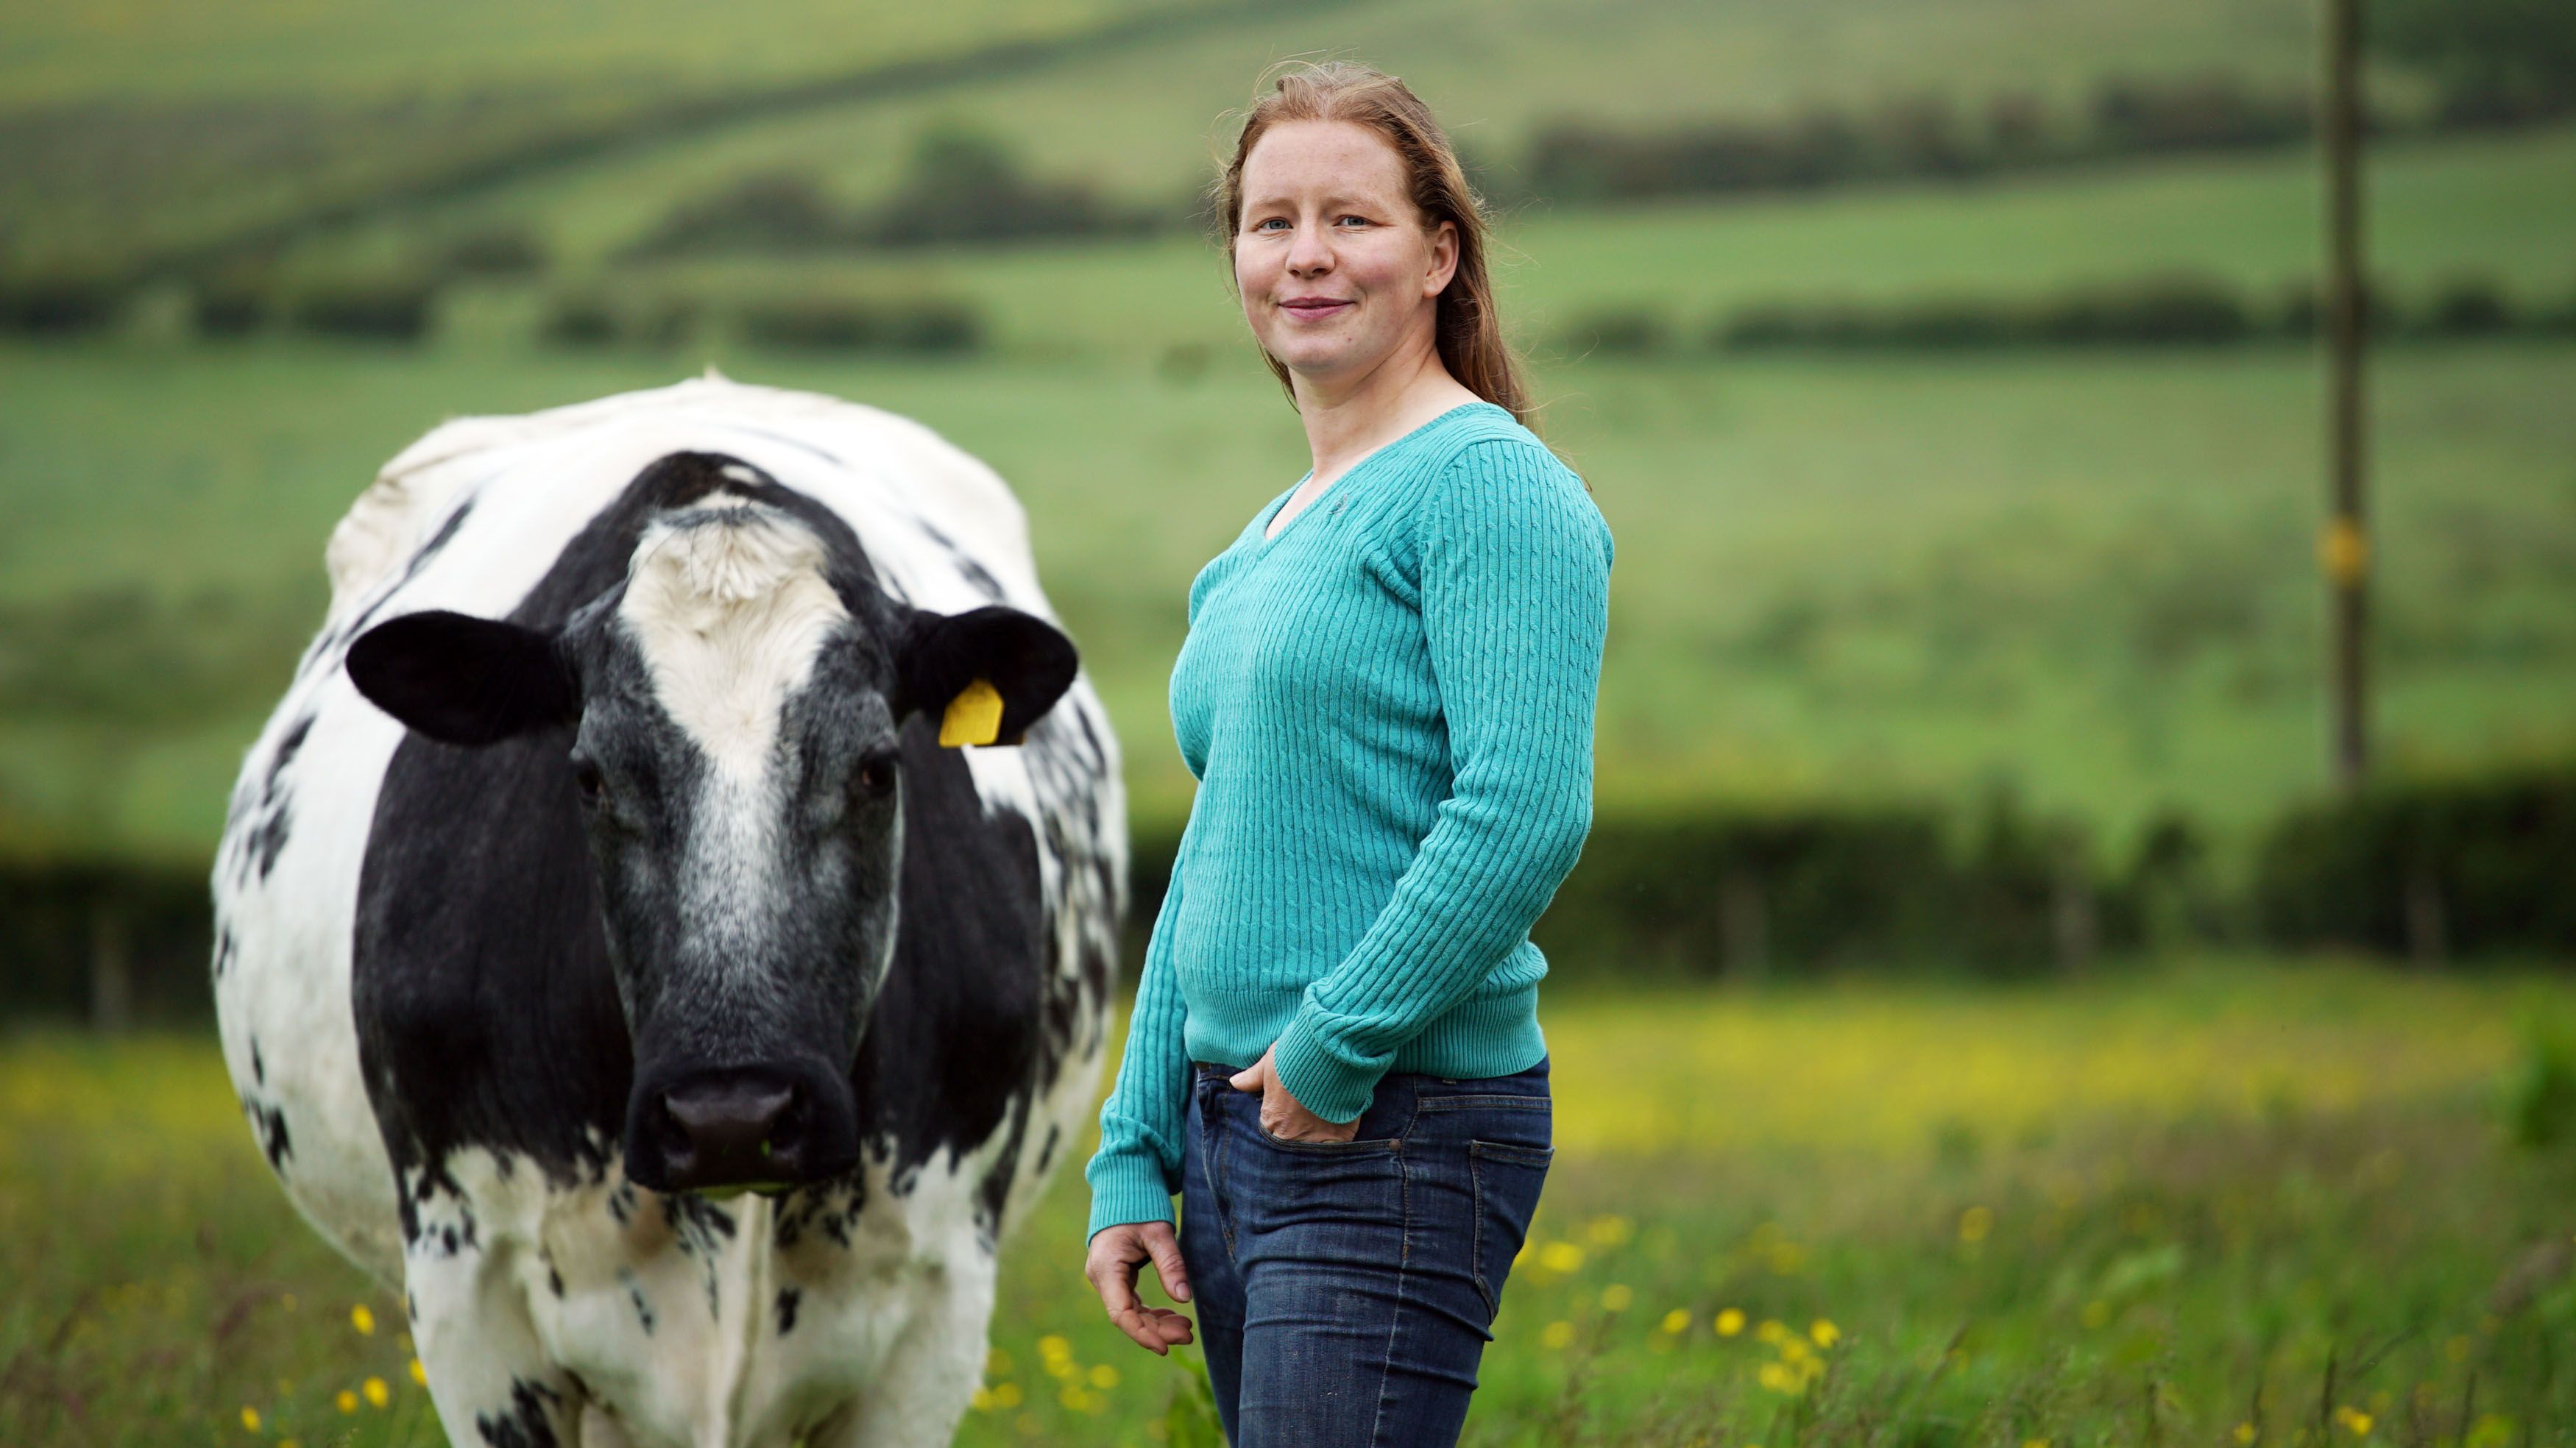 Love in the Countryside BBC: Meet the female farmer looking for love ...